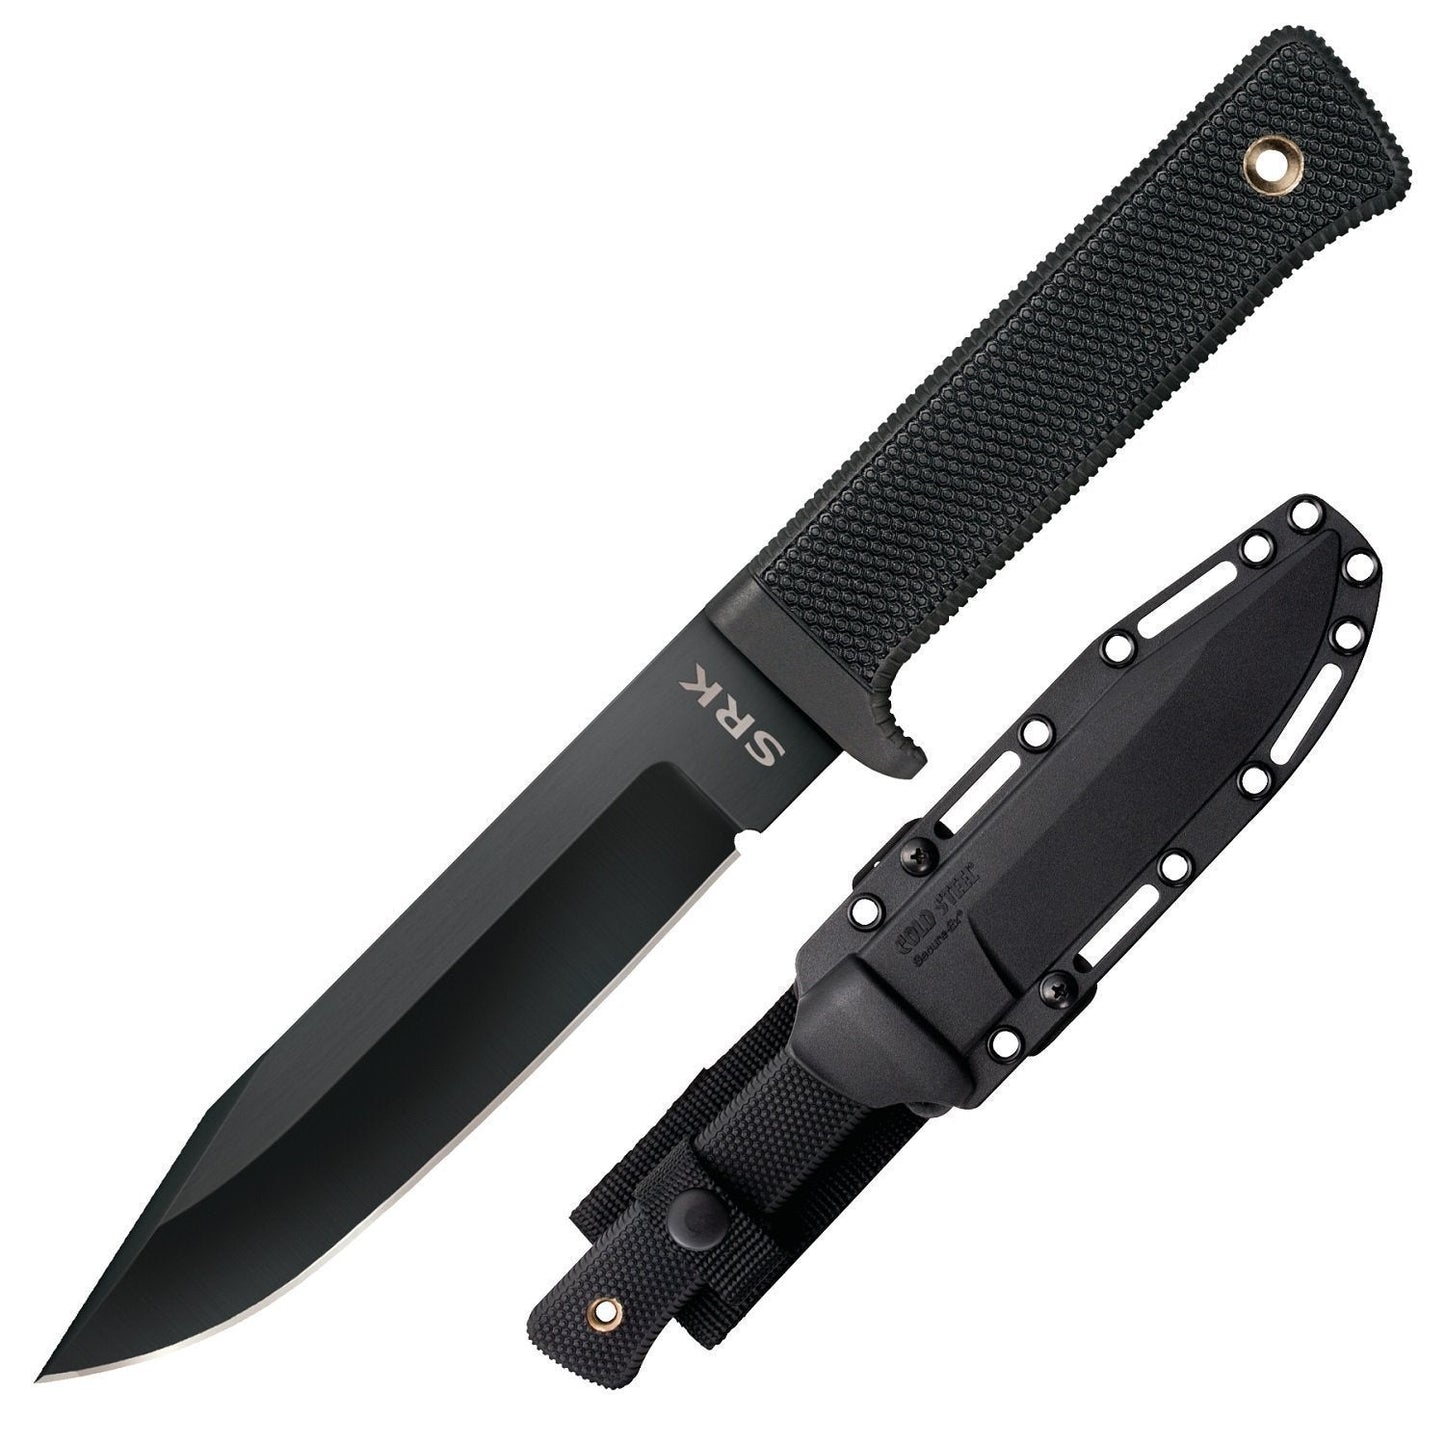 Cold Steel SRK Fixed 6in Blade 10.75 Inch Length with Sheath CS49LCK Tactical Distributors Ltd New Zealand